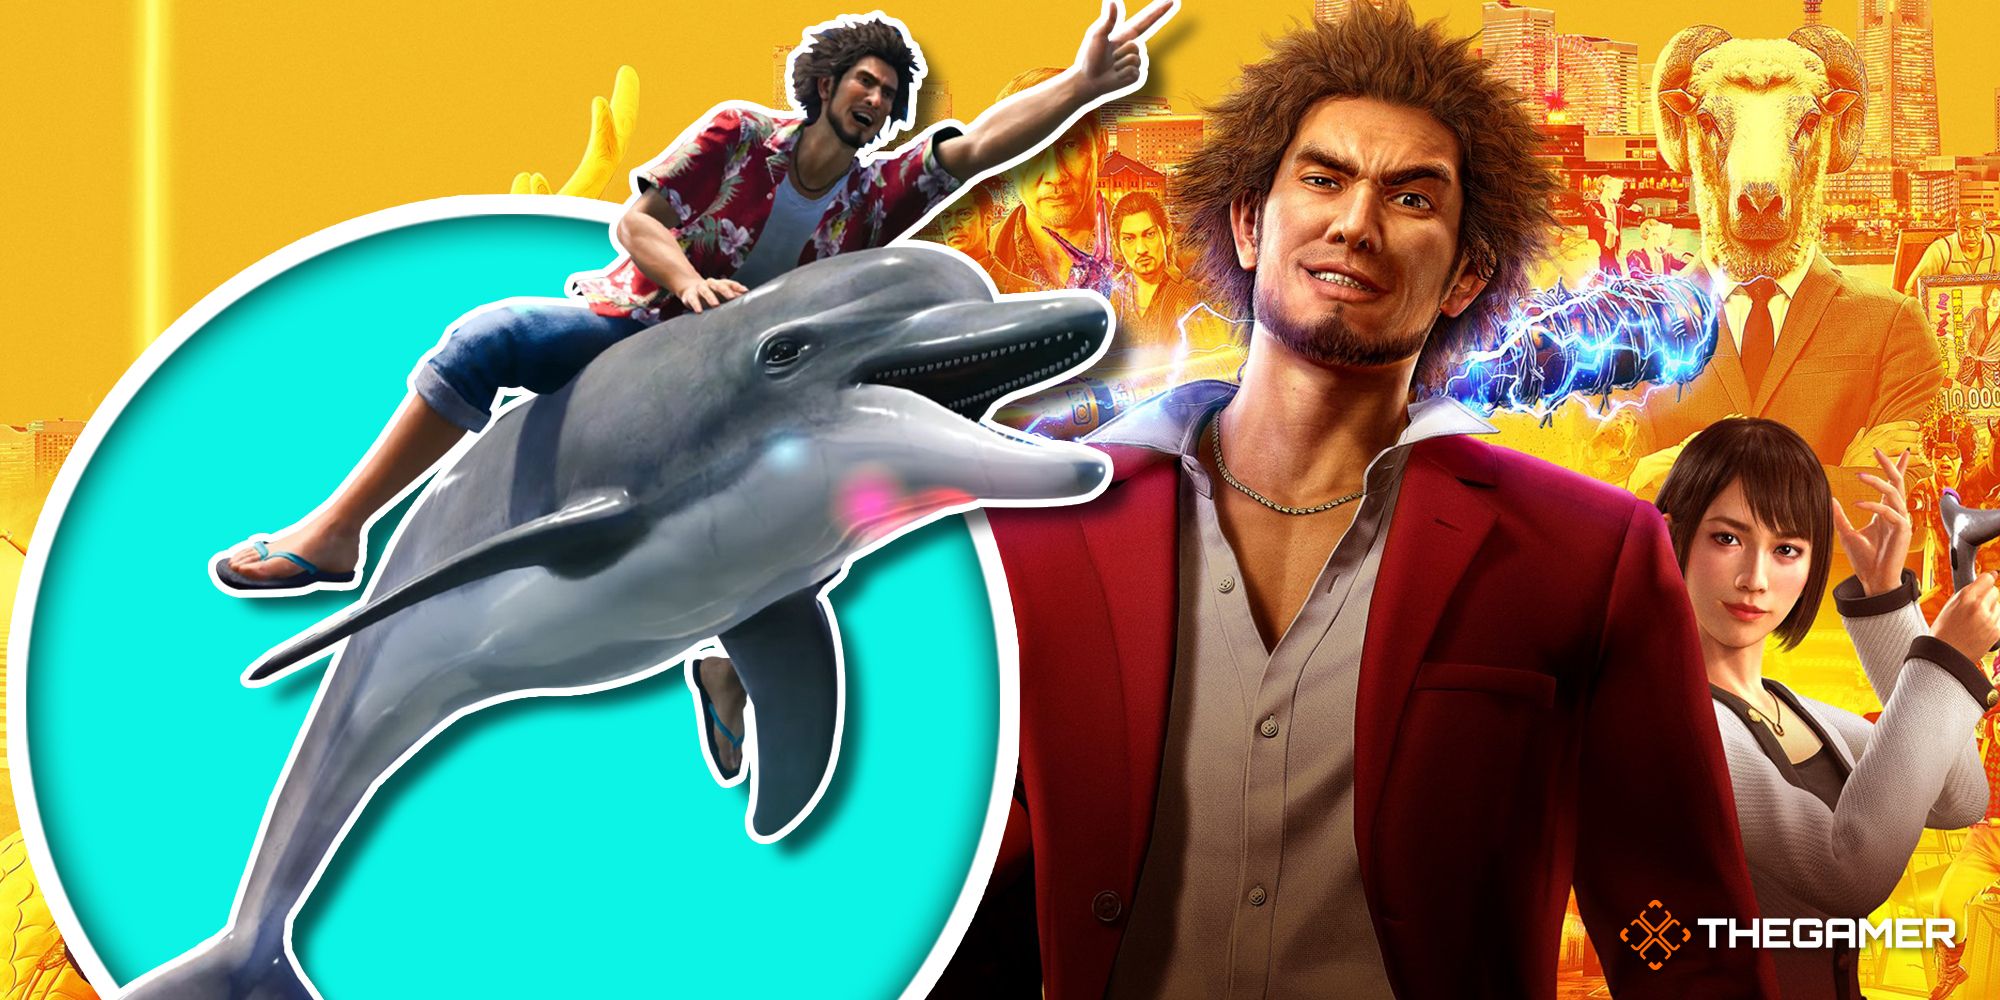 The key art for Yakuza: Like A Dragon in the background with Kasuga riding a dolphin in the left side of the foreground